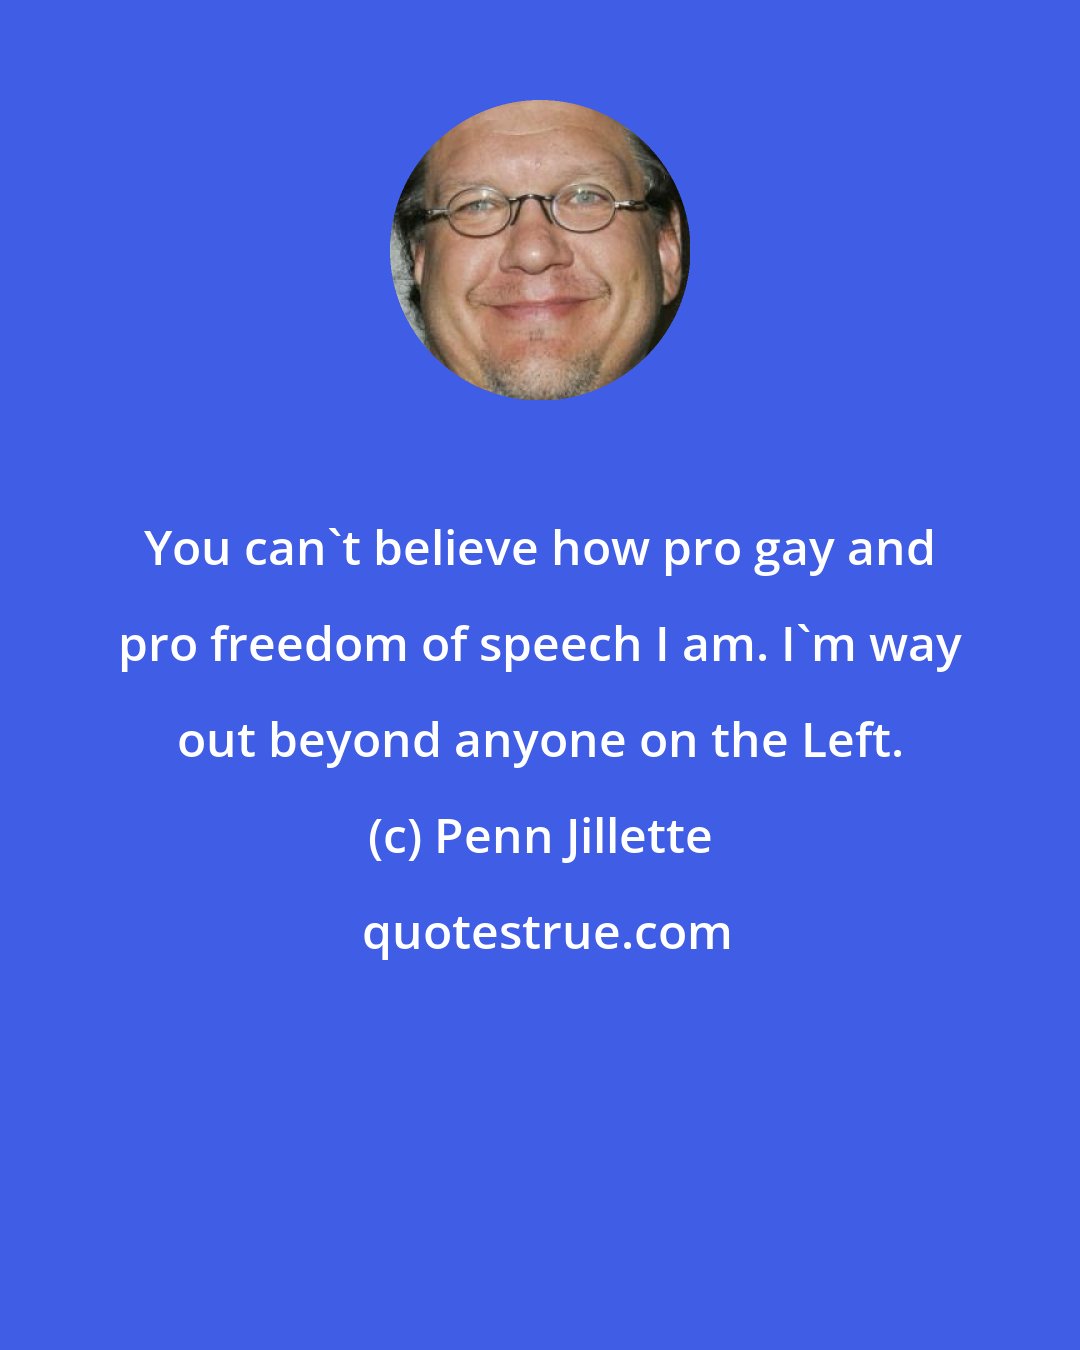 Penn Jillette: You can't believe how pro gay and pro freedom of speech I am. I'm way out beyond anyone on the Left.